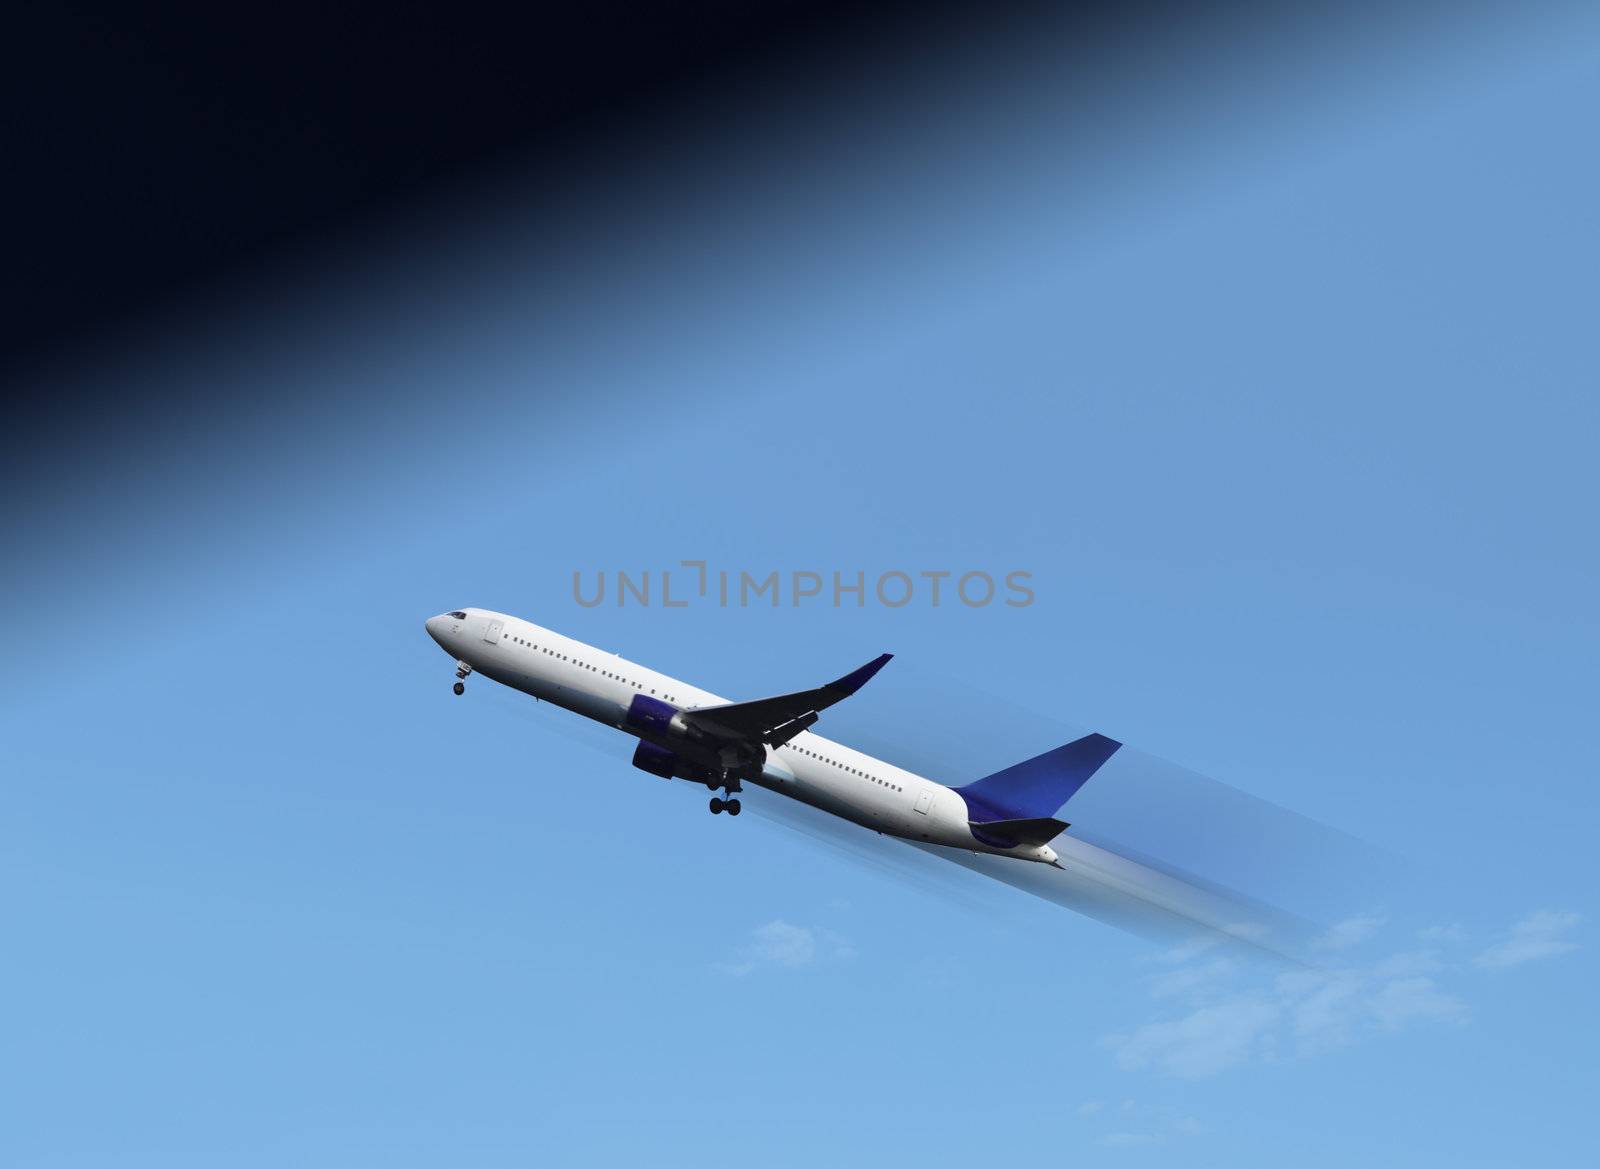 Aircraft in the sky  by photochecker